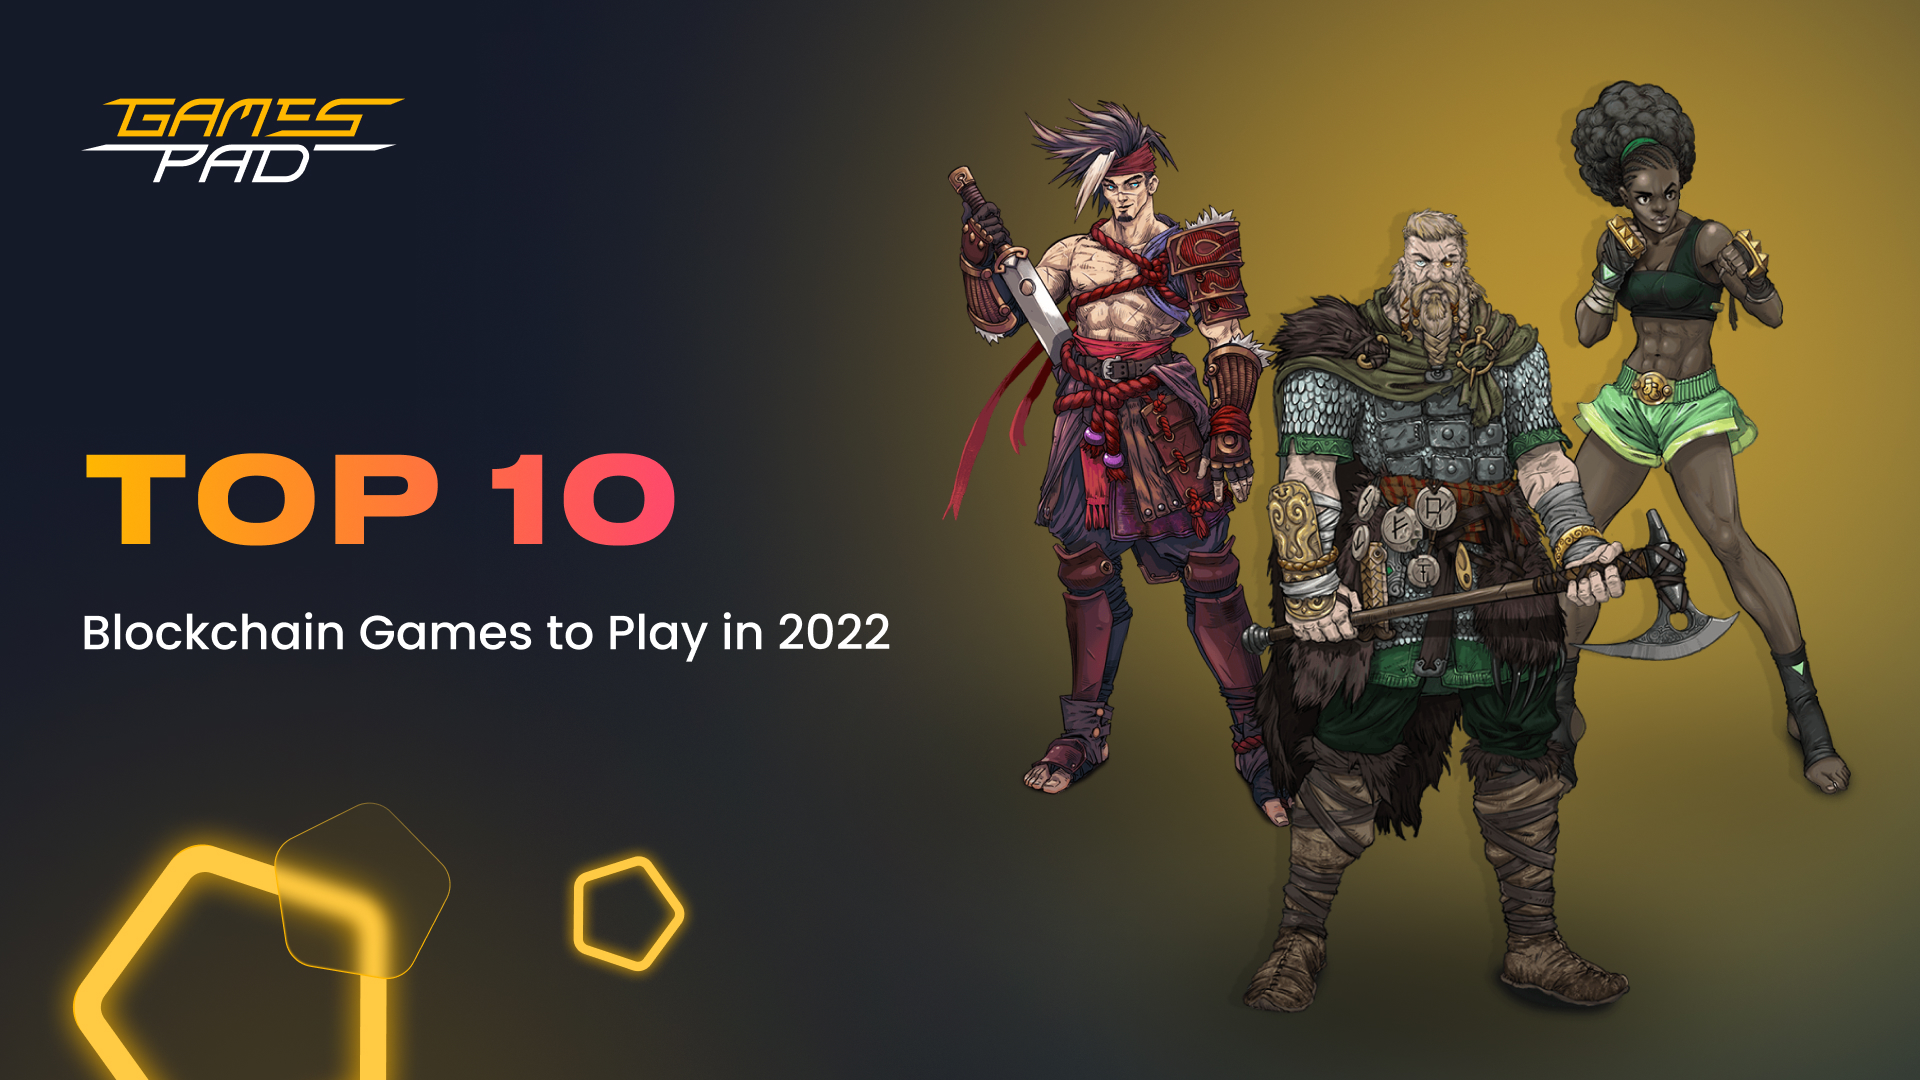 Top 10 Blockchain Games to Play In 2022